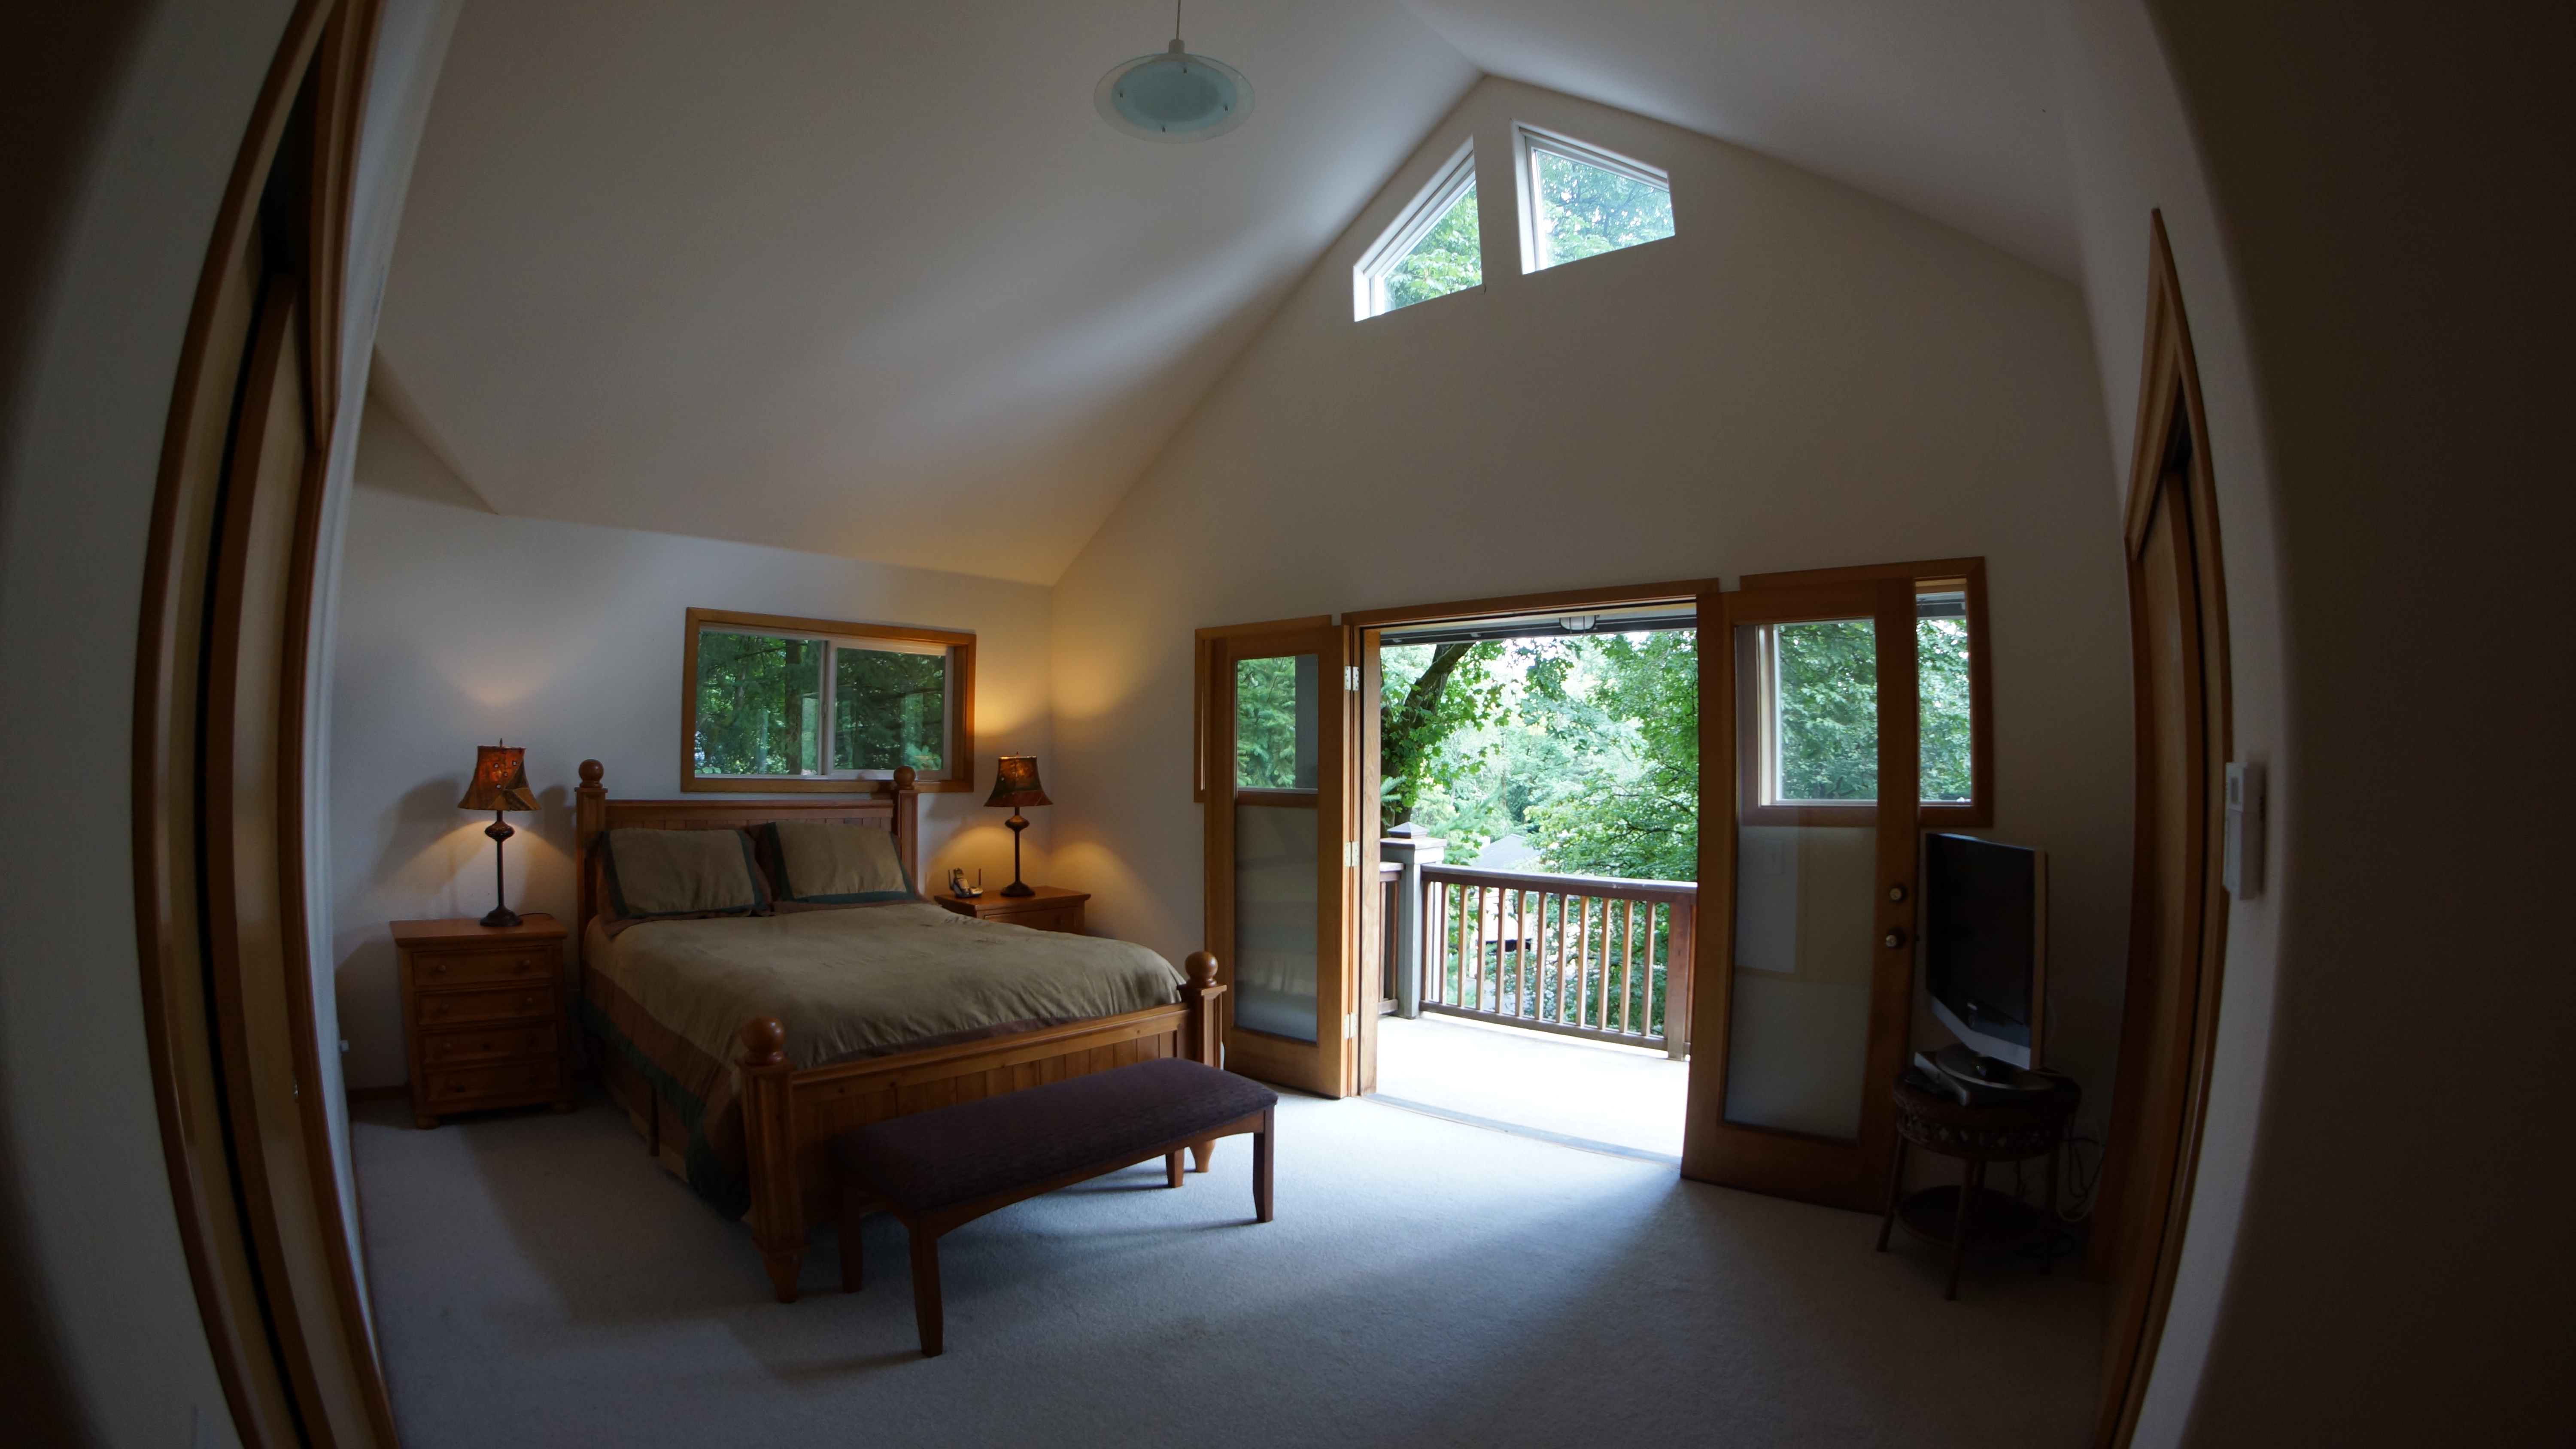 This bedroom has High Ceilings, many windows, and <BR>a Deck with Views.